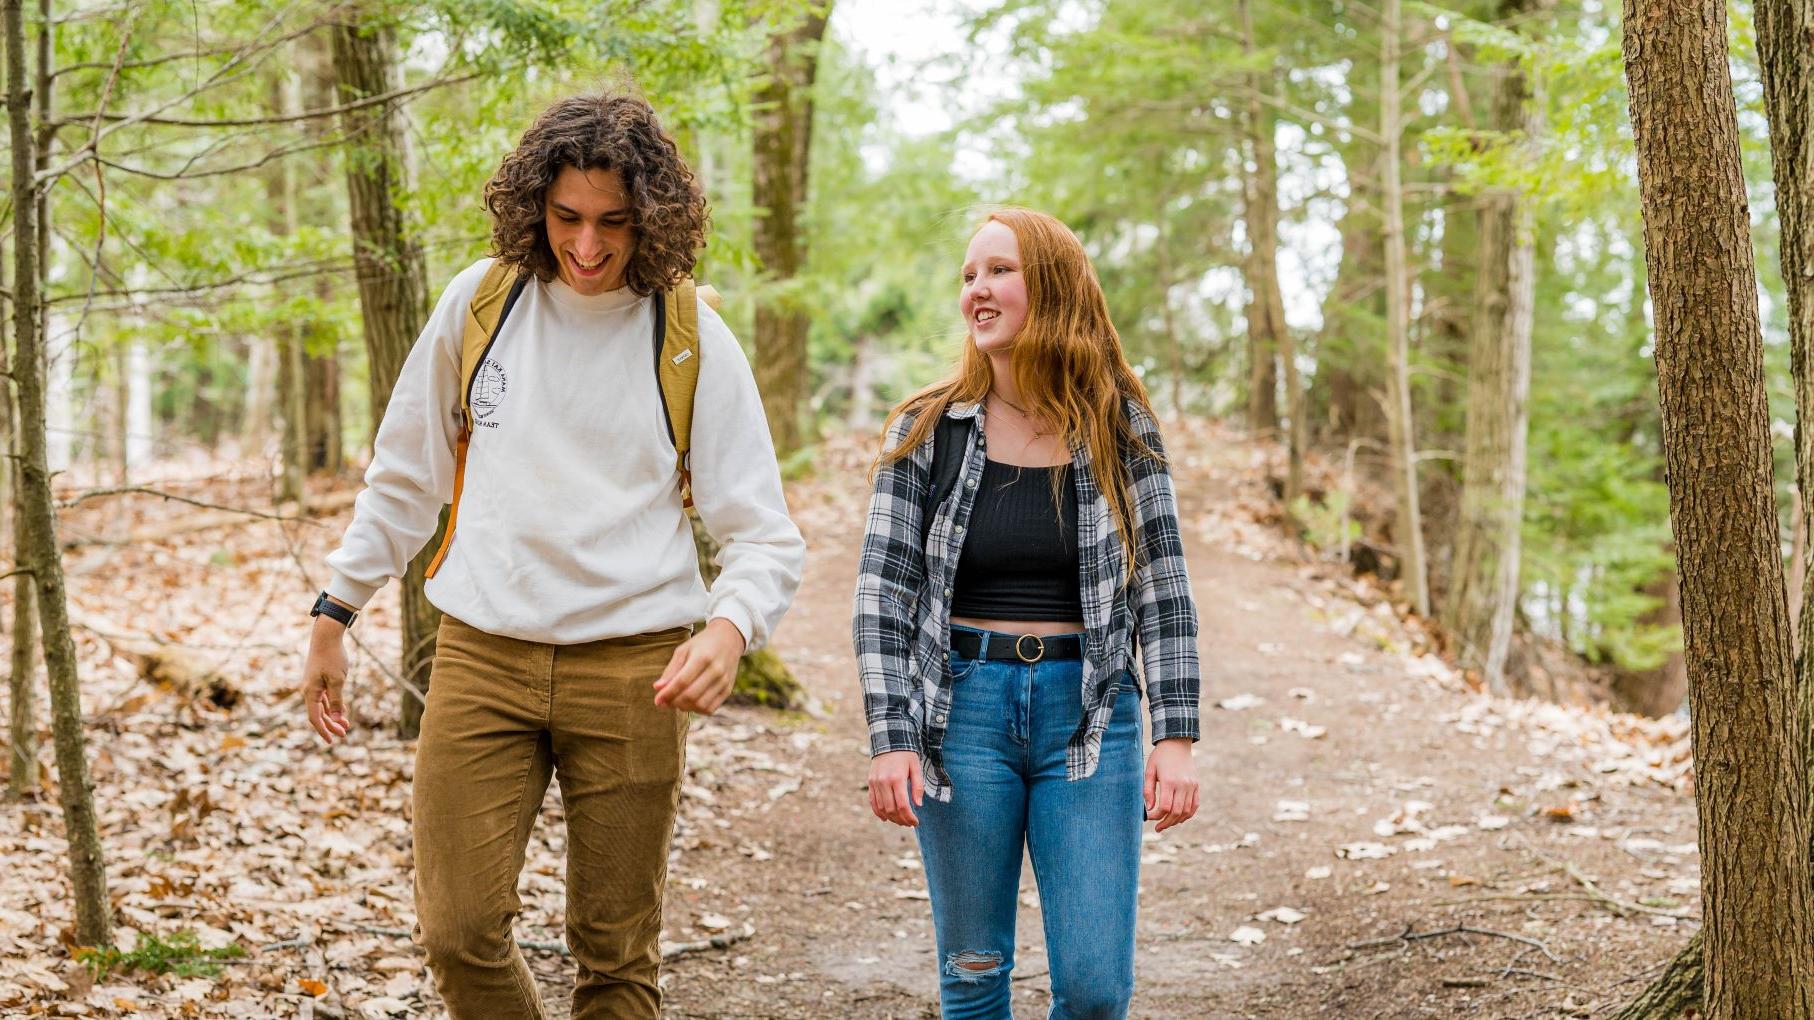 Two students smiling and in conversation as they walk toward the camera in a wooded trail.